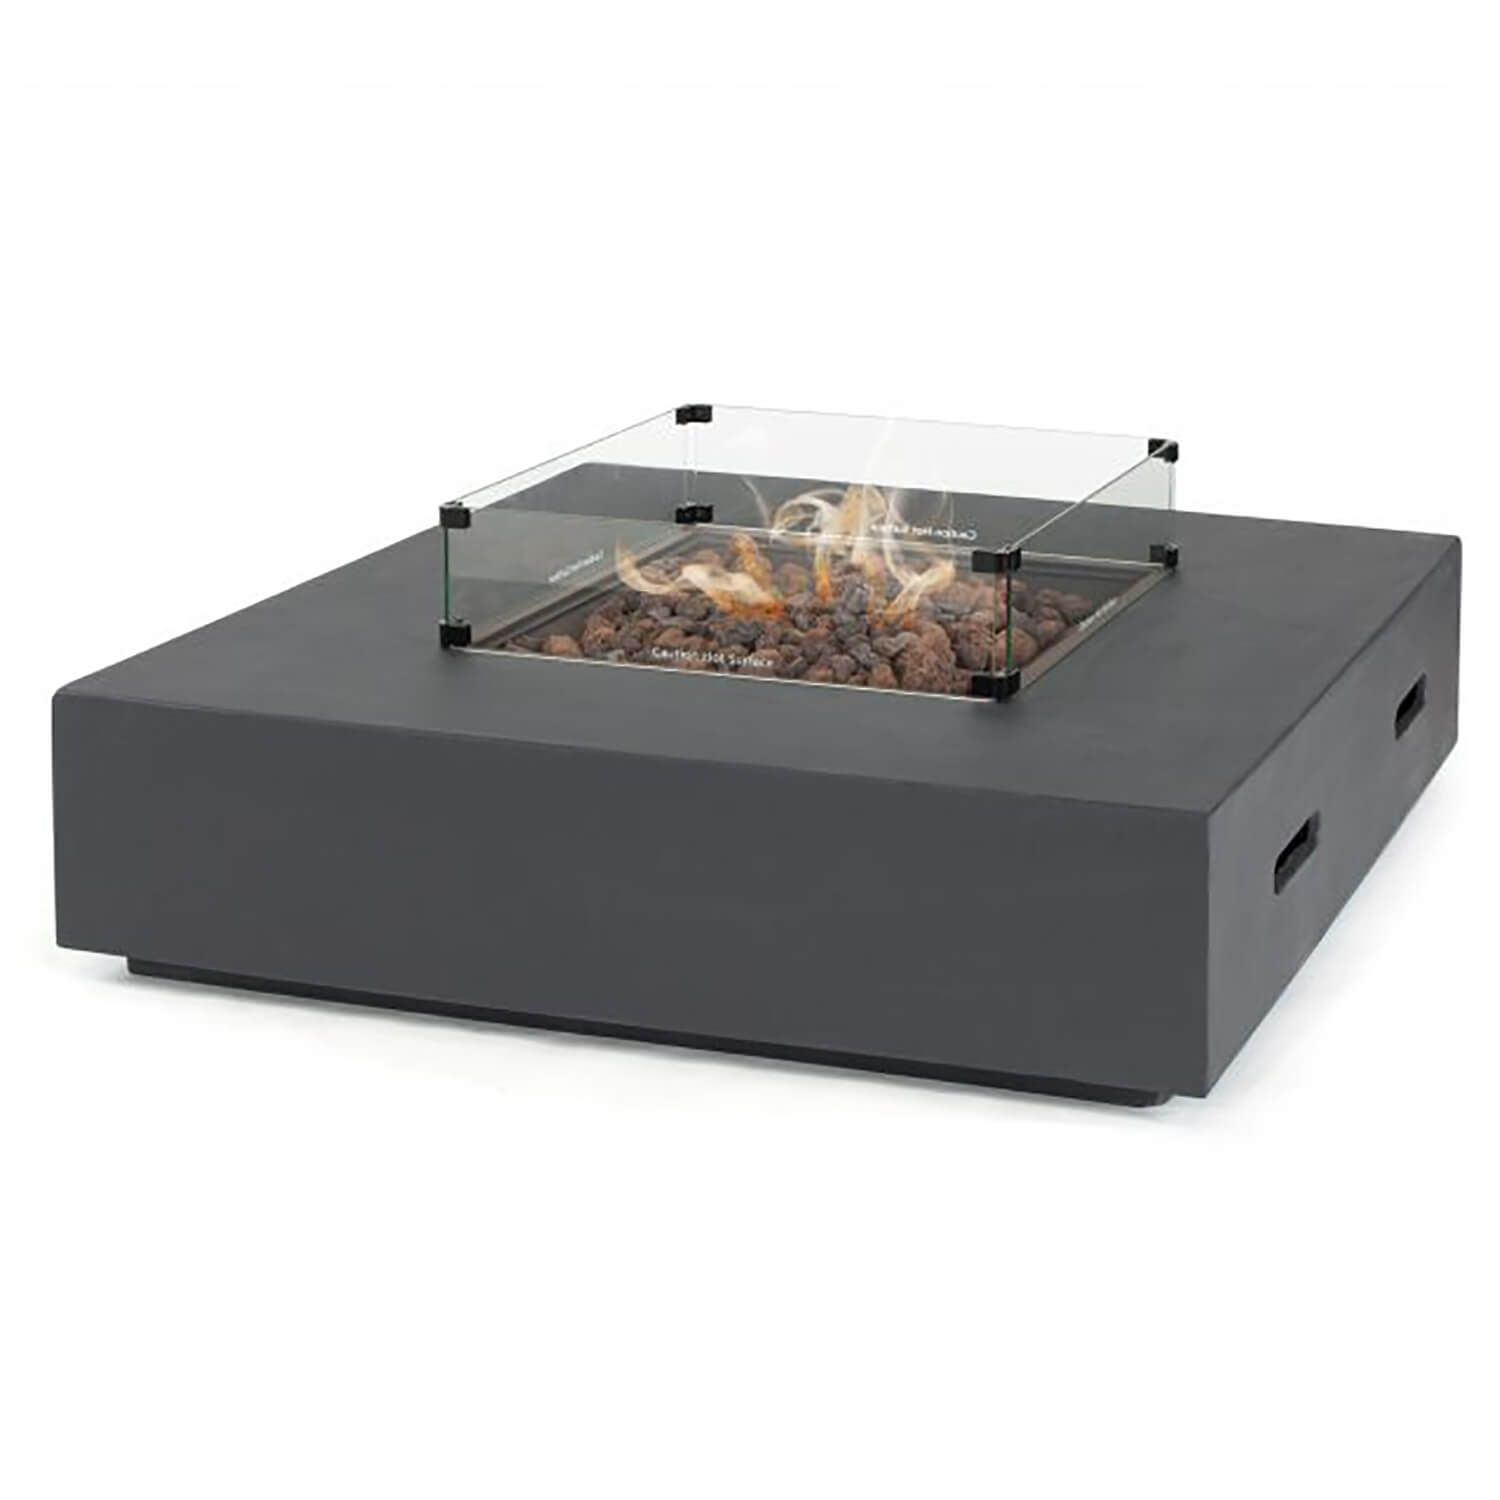 Kettler Kalos Universal Coffee Table, Glass Fire Pit